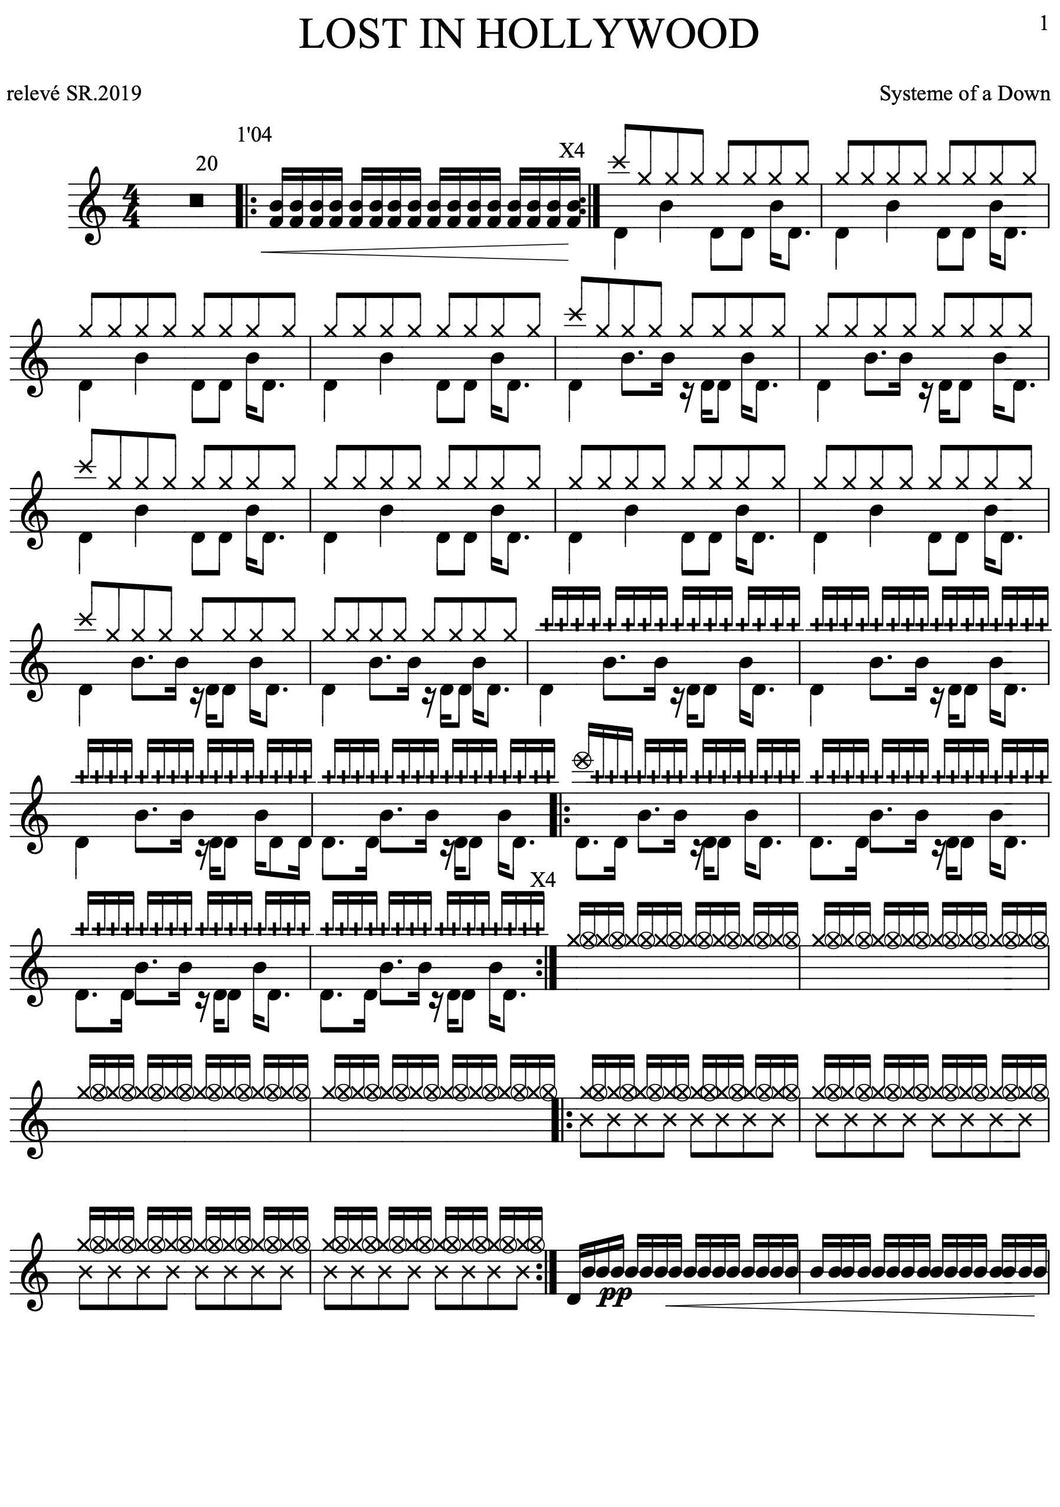 Lost in Hollywood - System of a Down - Full Drum Transcription / Drum Sheet Music - Rossoni